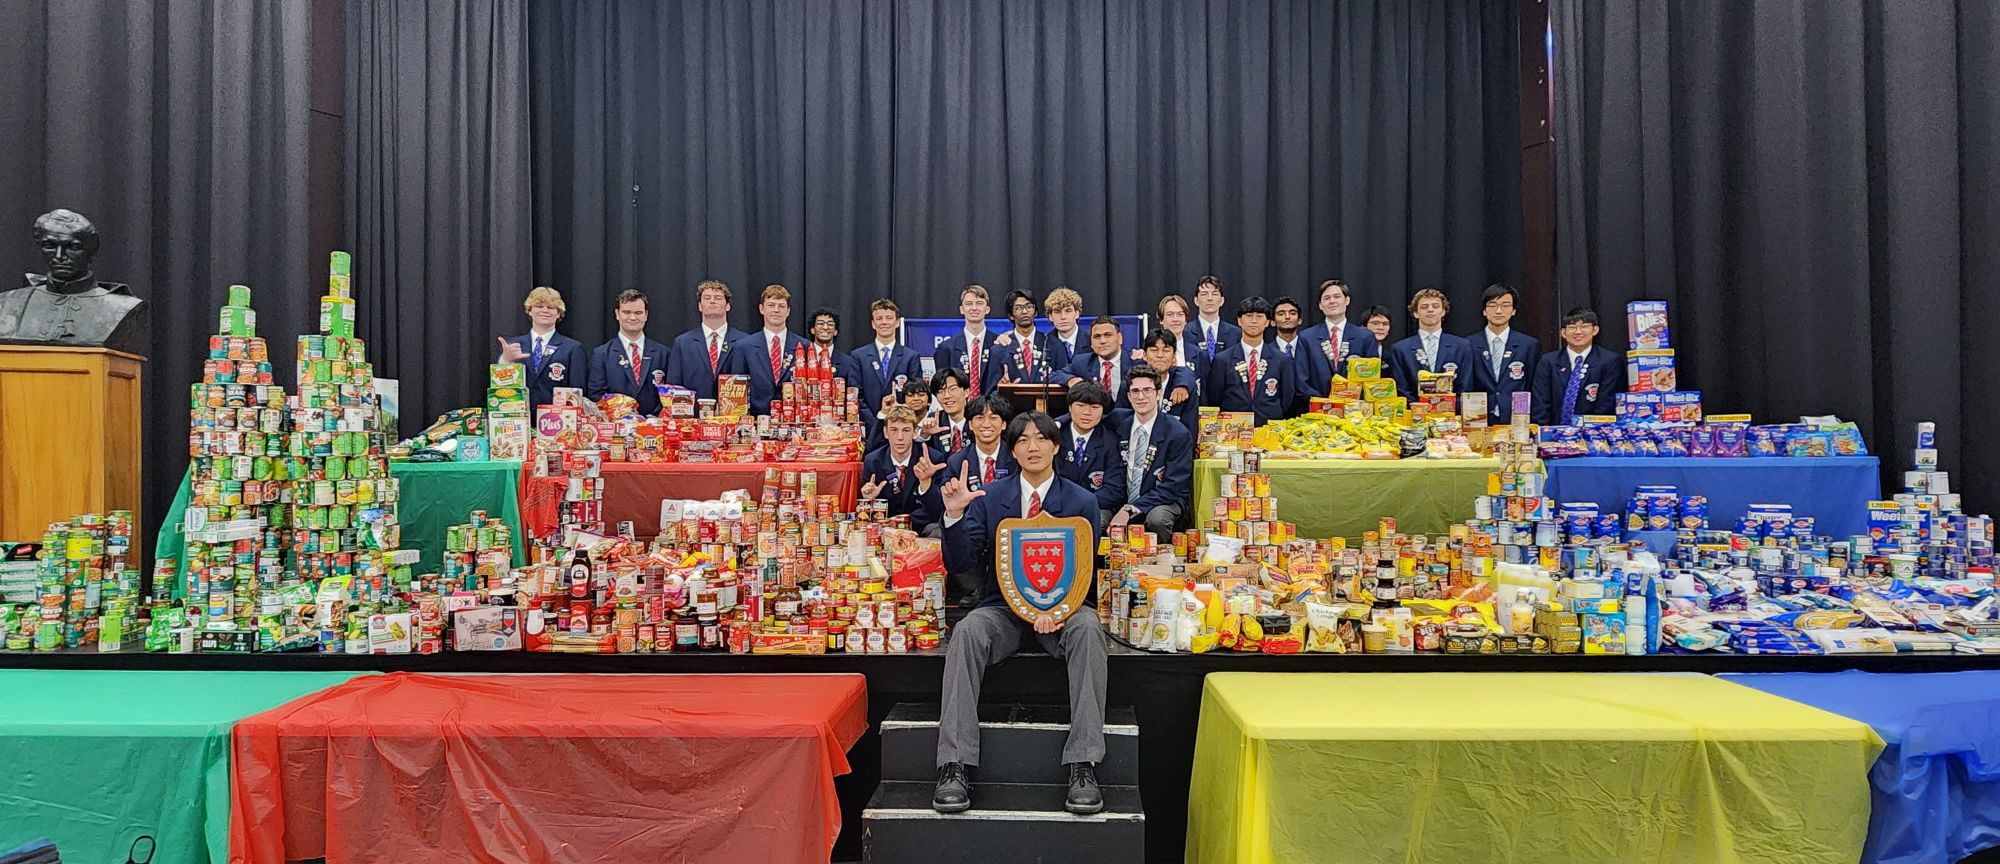 Food Drive 2023 collects over 3000 items for De Paul House